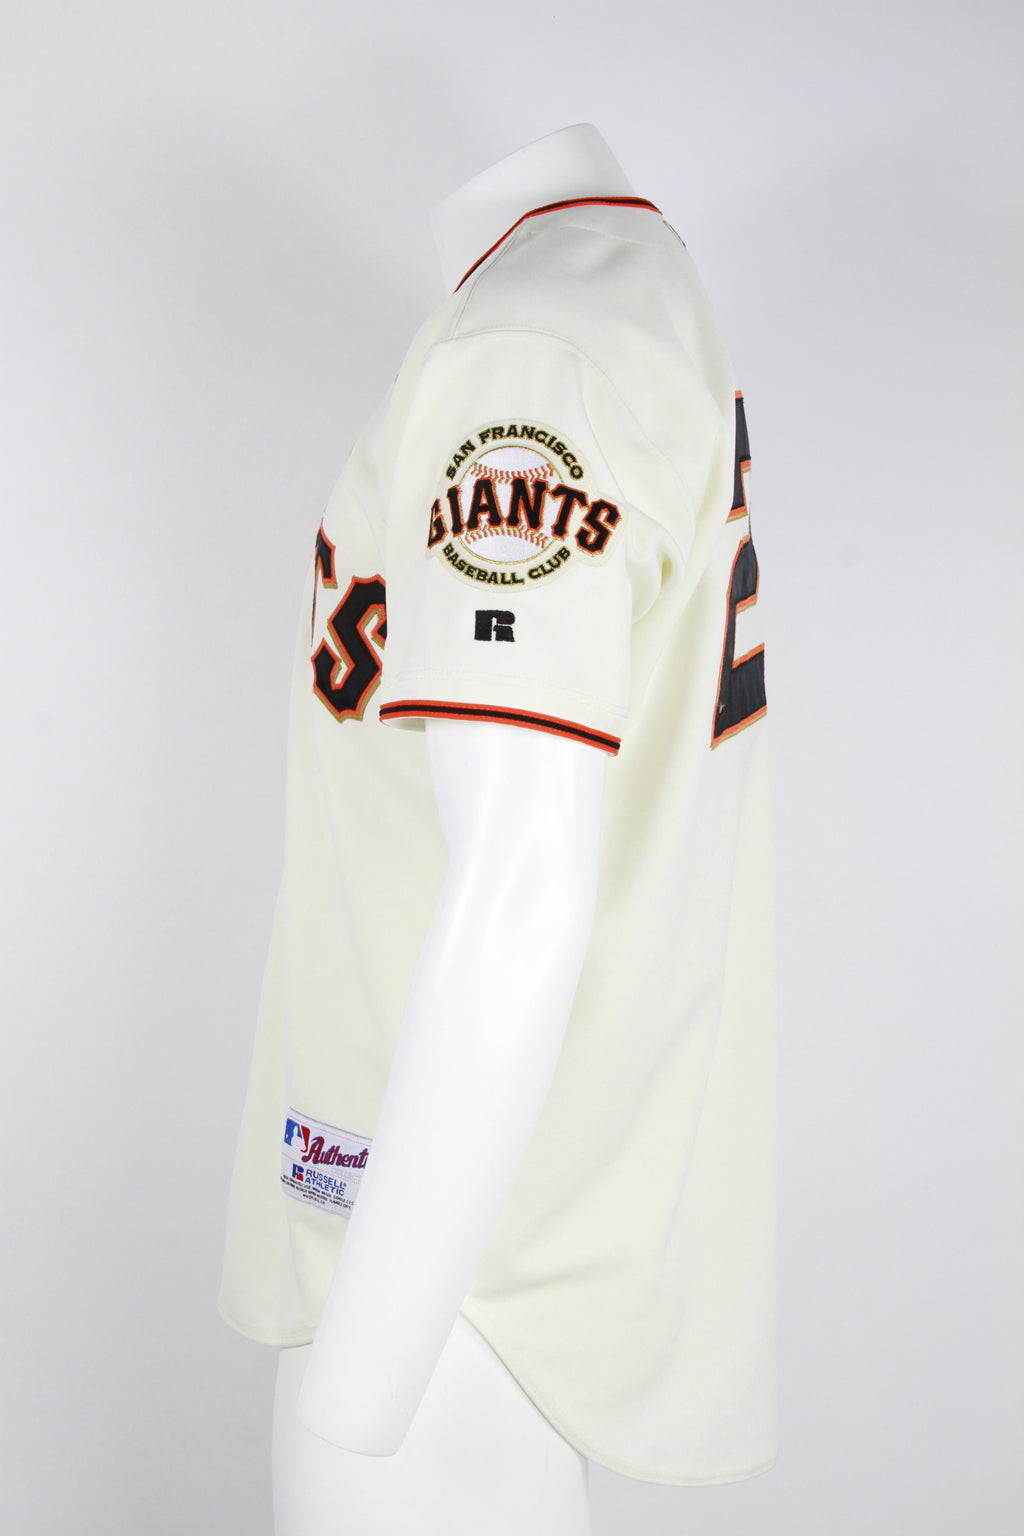 Team Issue San Francisco Giants Jersey 46 +2 Russell Authentic Pro Cut Game